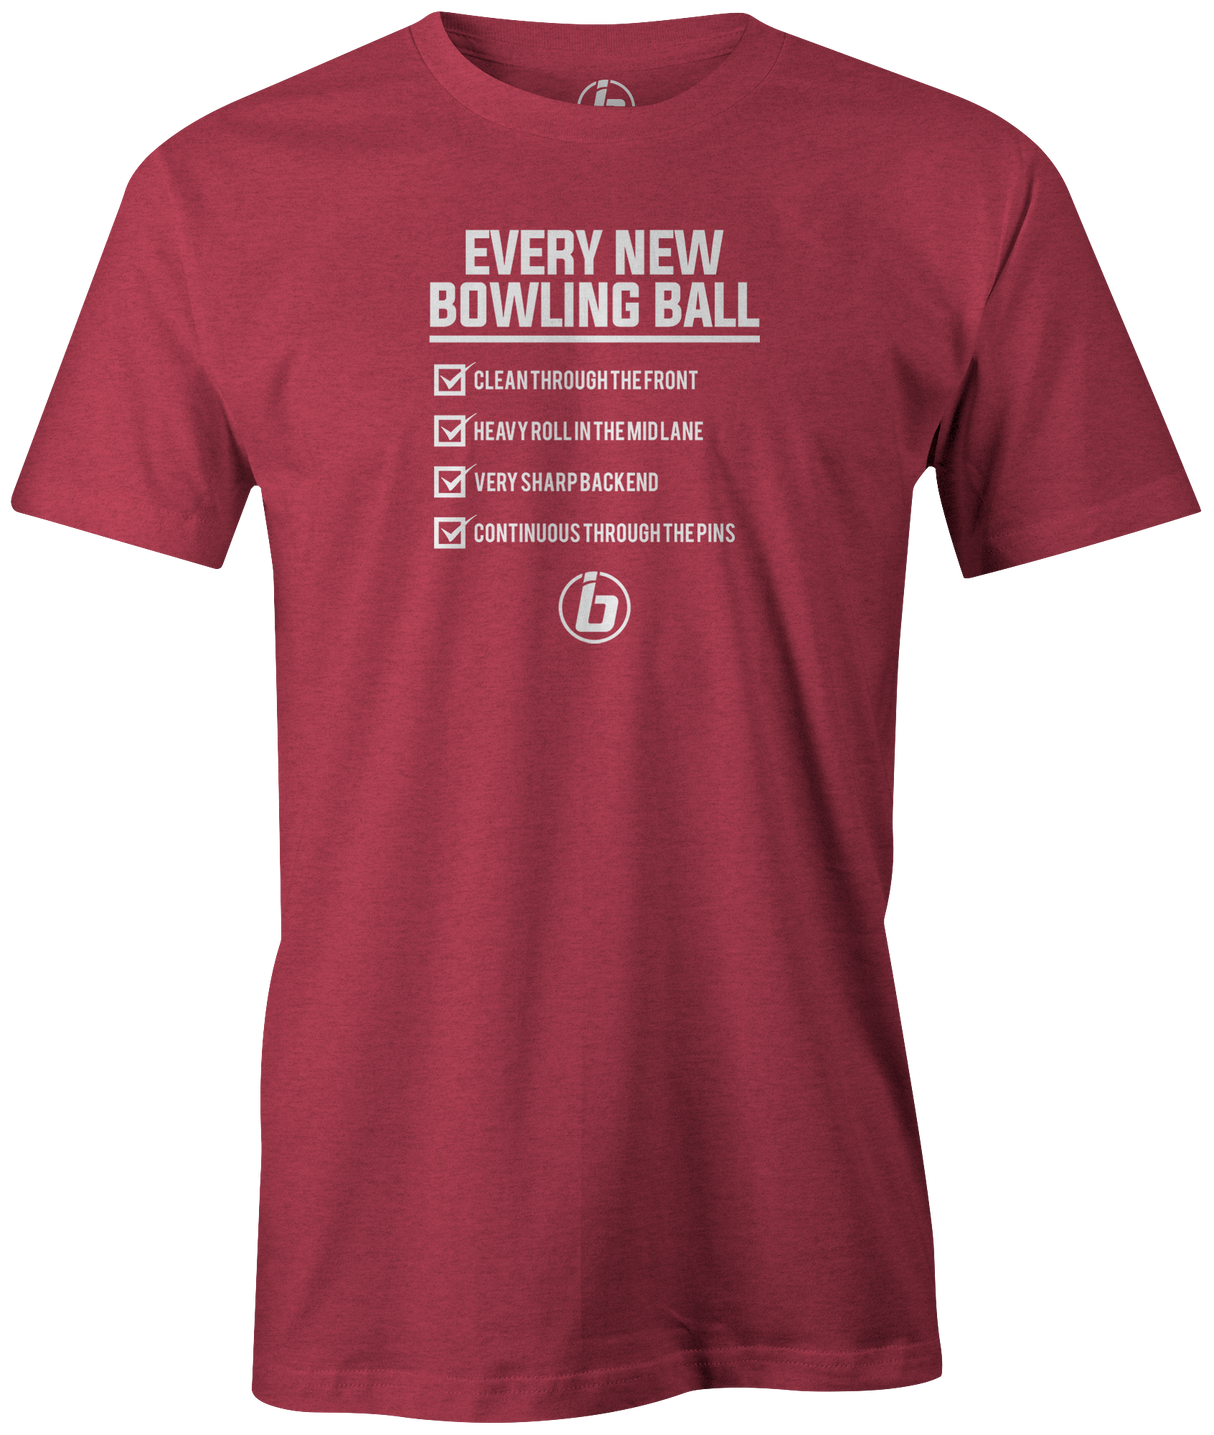 Every New Bowling Ball